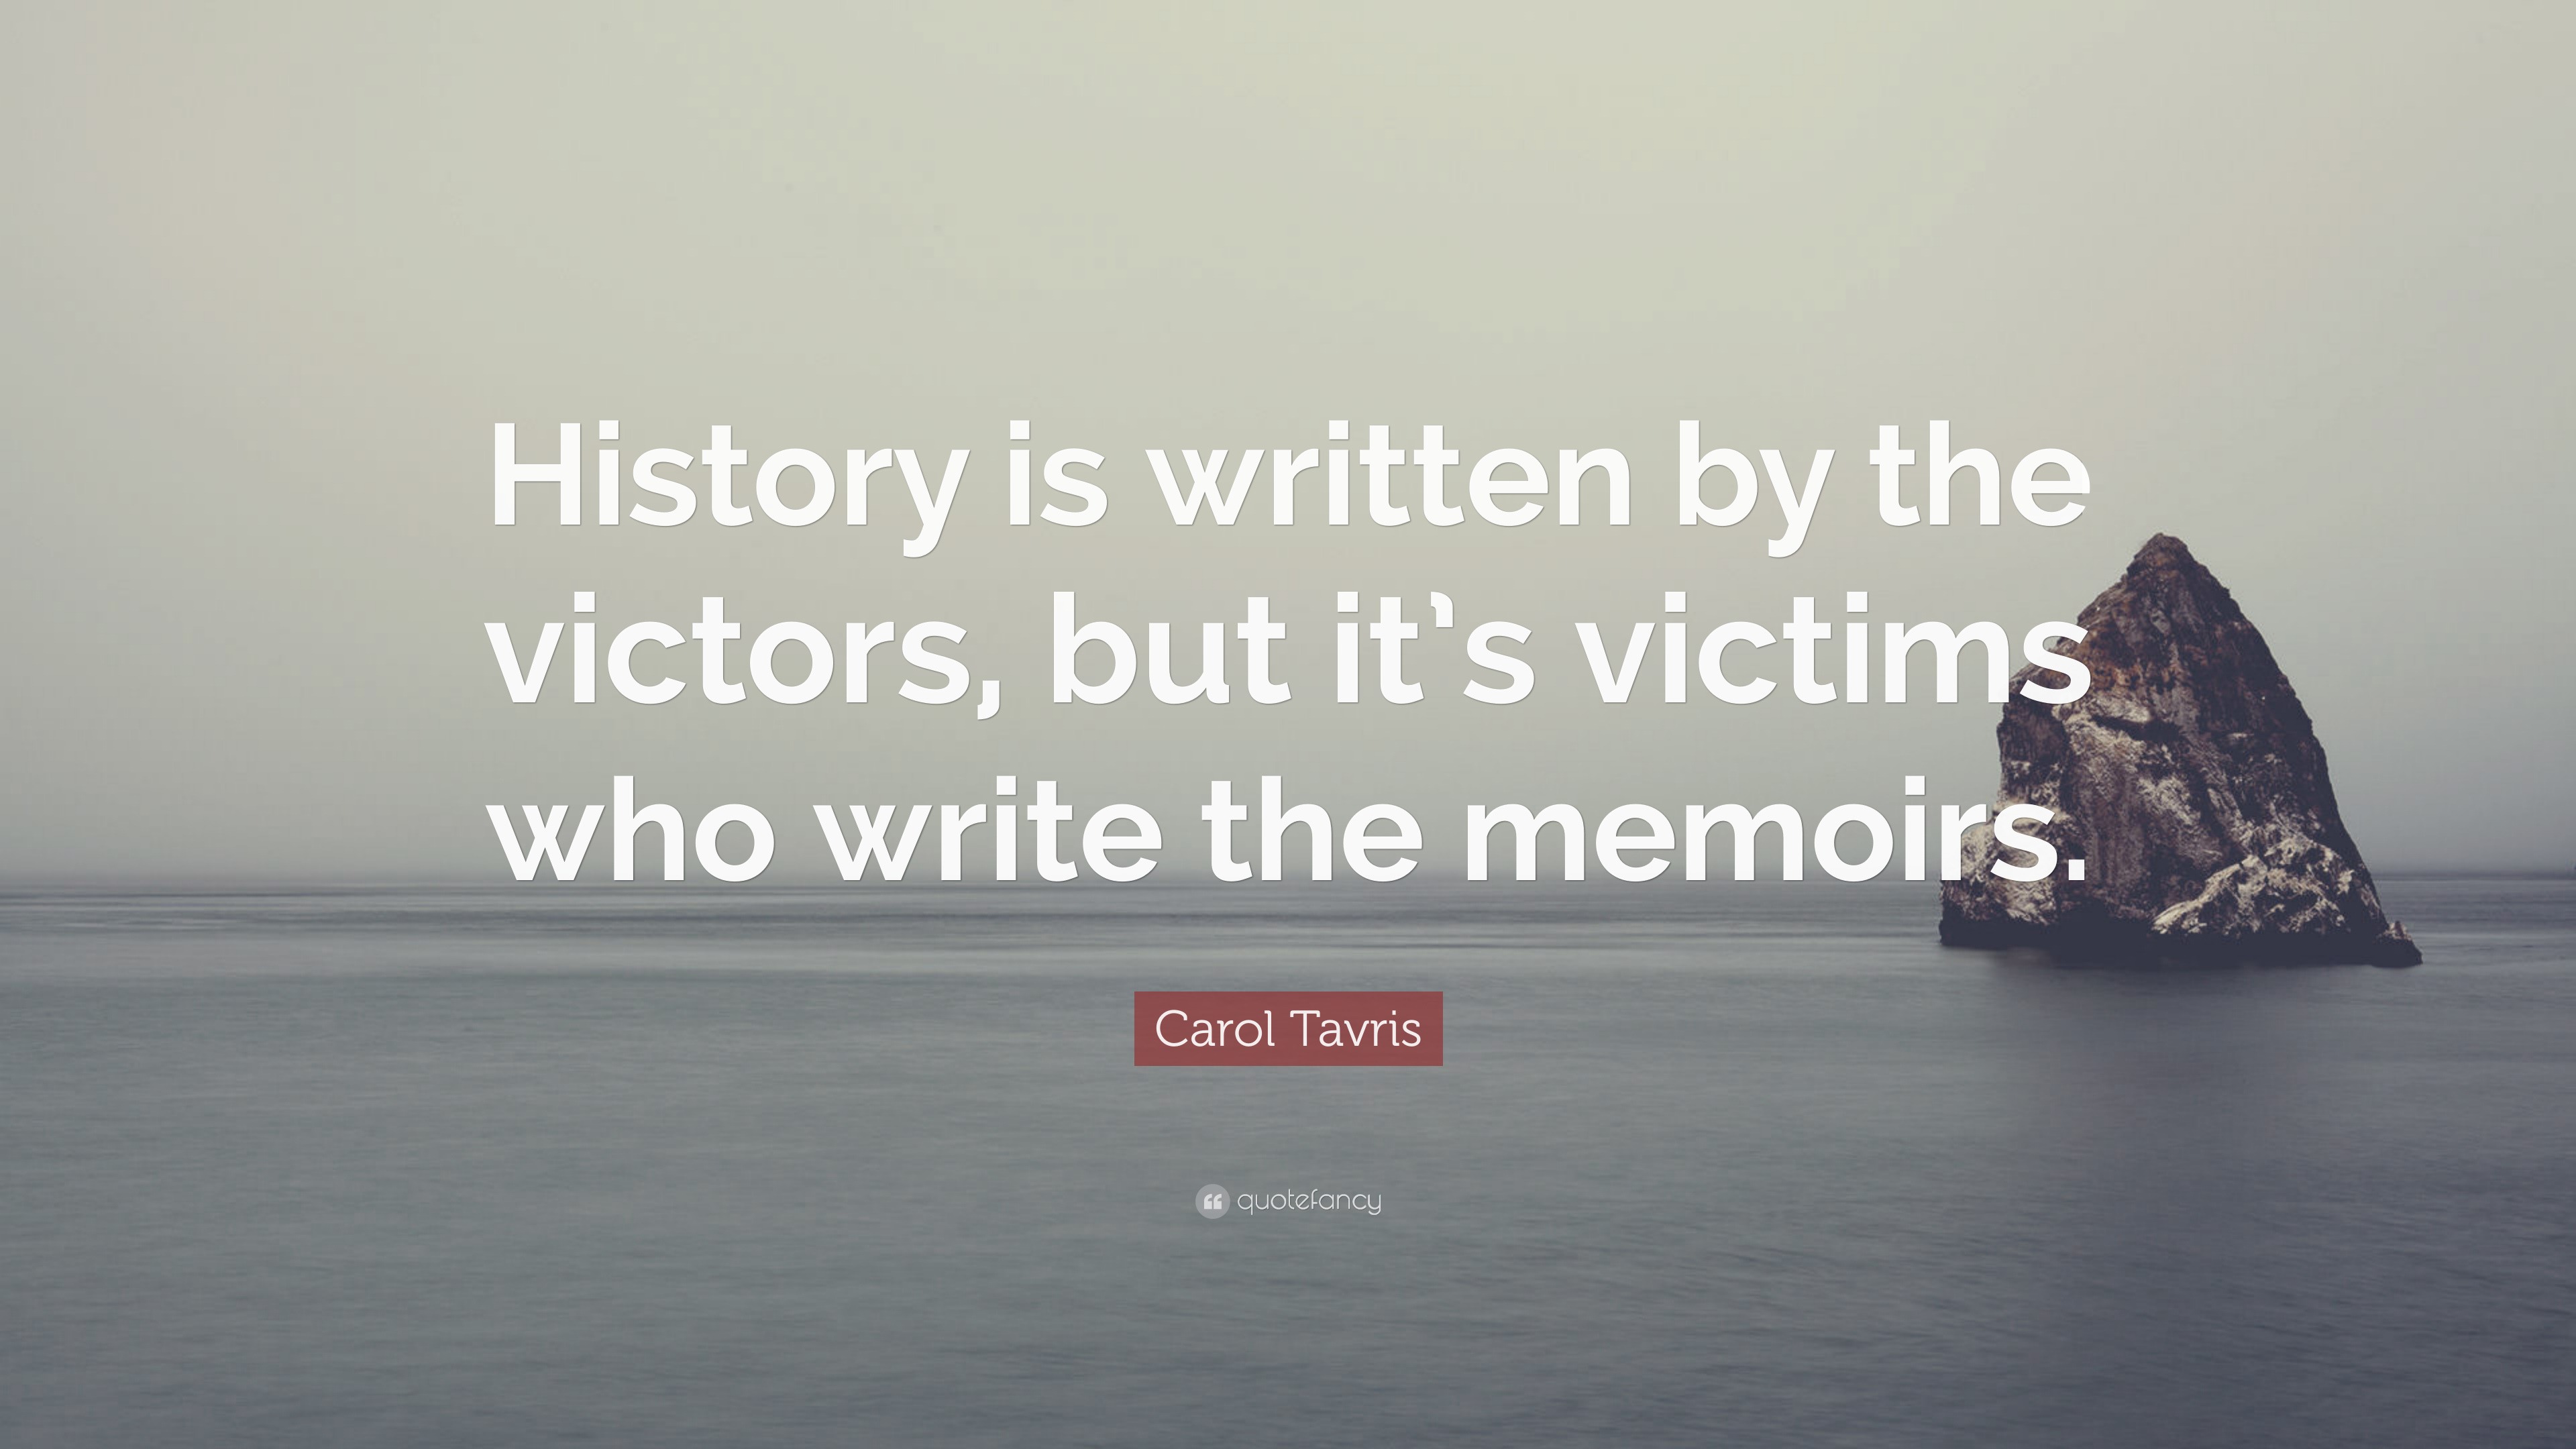 History is written by the victors. - phrase meaning and origin